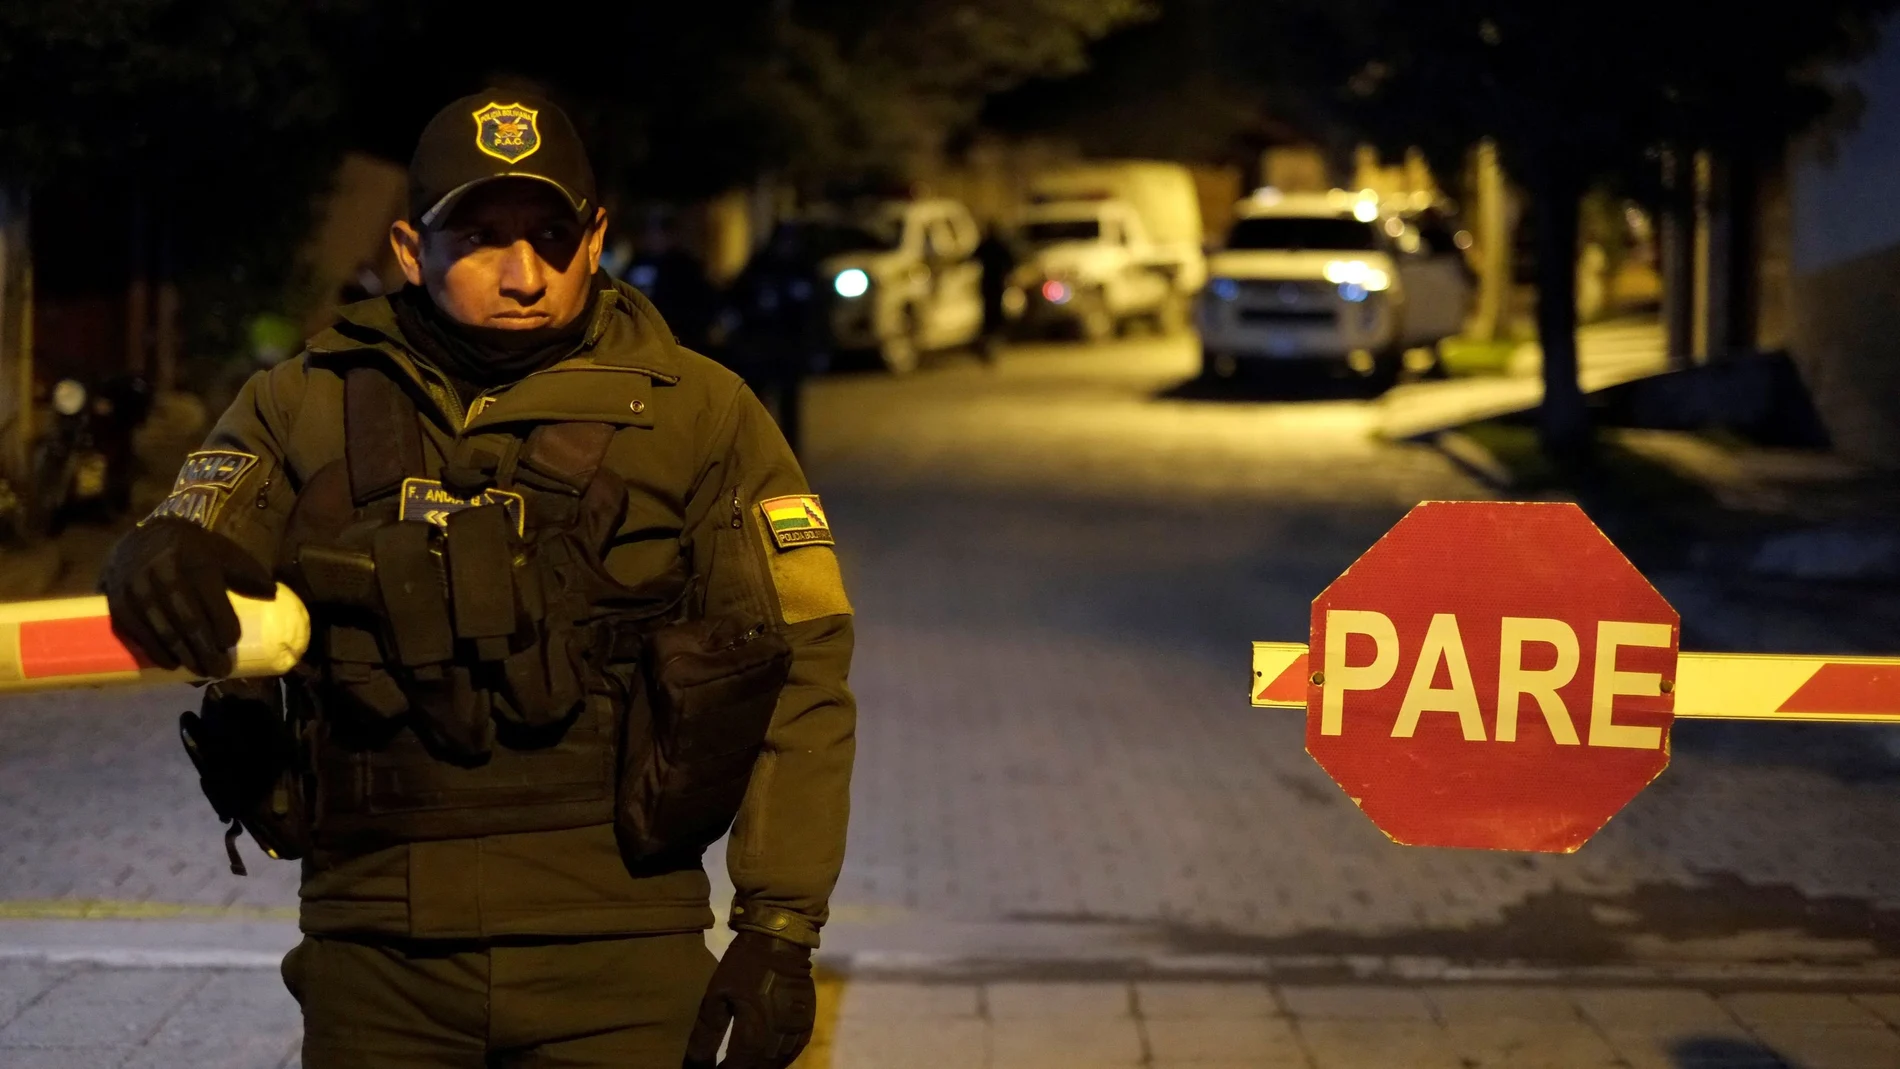 A police officer stands guard at the entrance of the Urbanizacion La Rinconada, where the residence of Mexico's ambassador is located, in La Paz